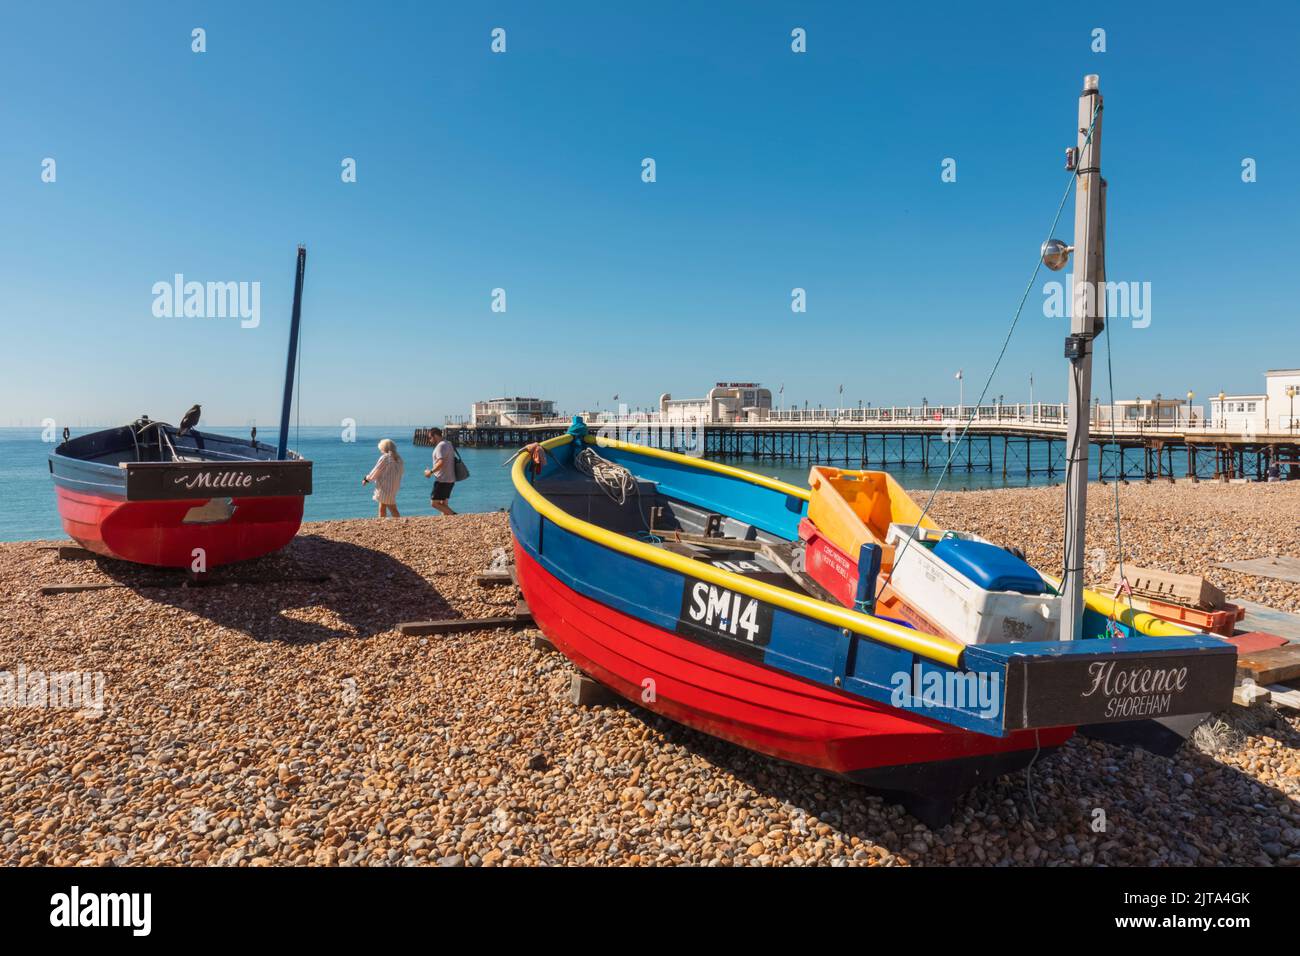 England, West Sussex, Worthing, Worthing Beach, Colourful Fishing Boats and Worthing Pier Stock Photo